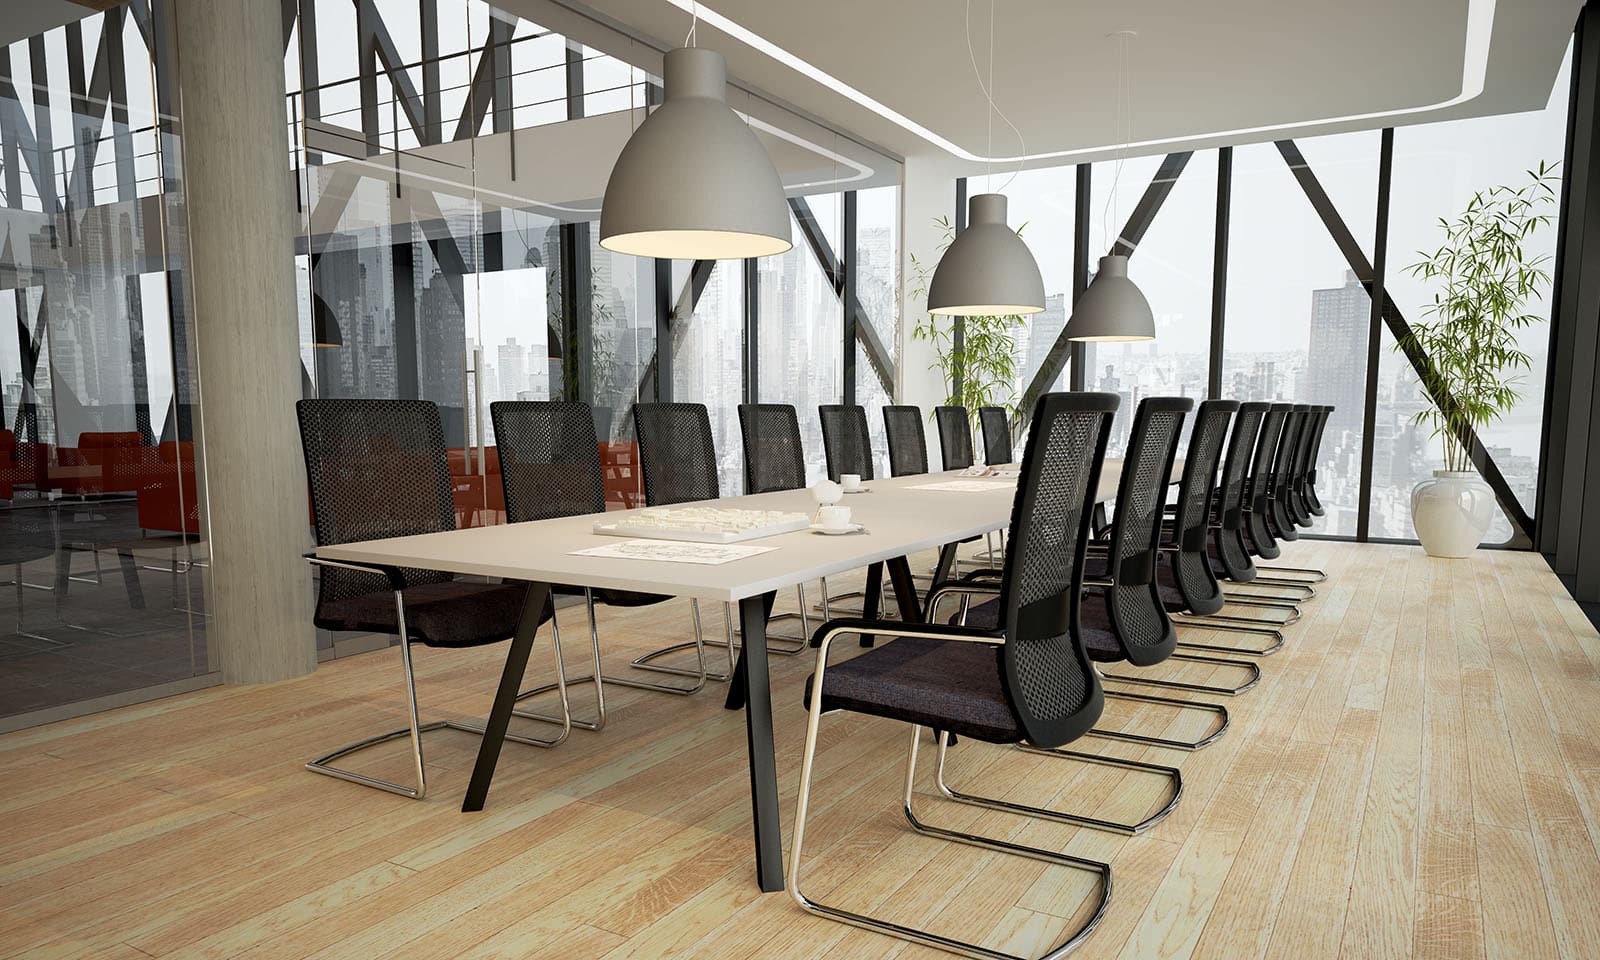 Choose Pure Office Solutions for all your meeting room table needs